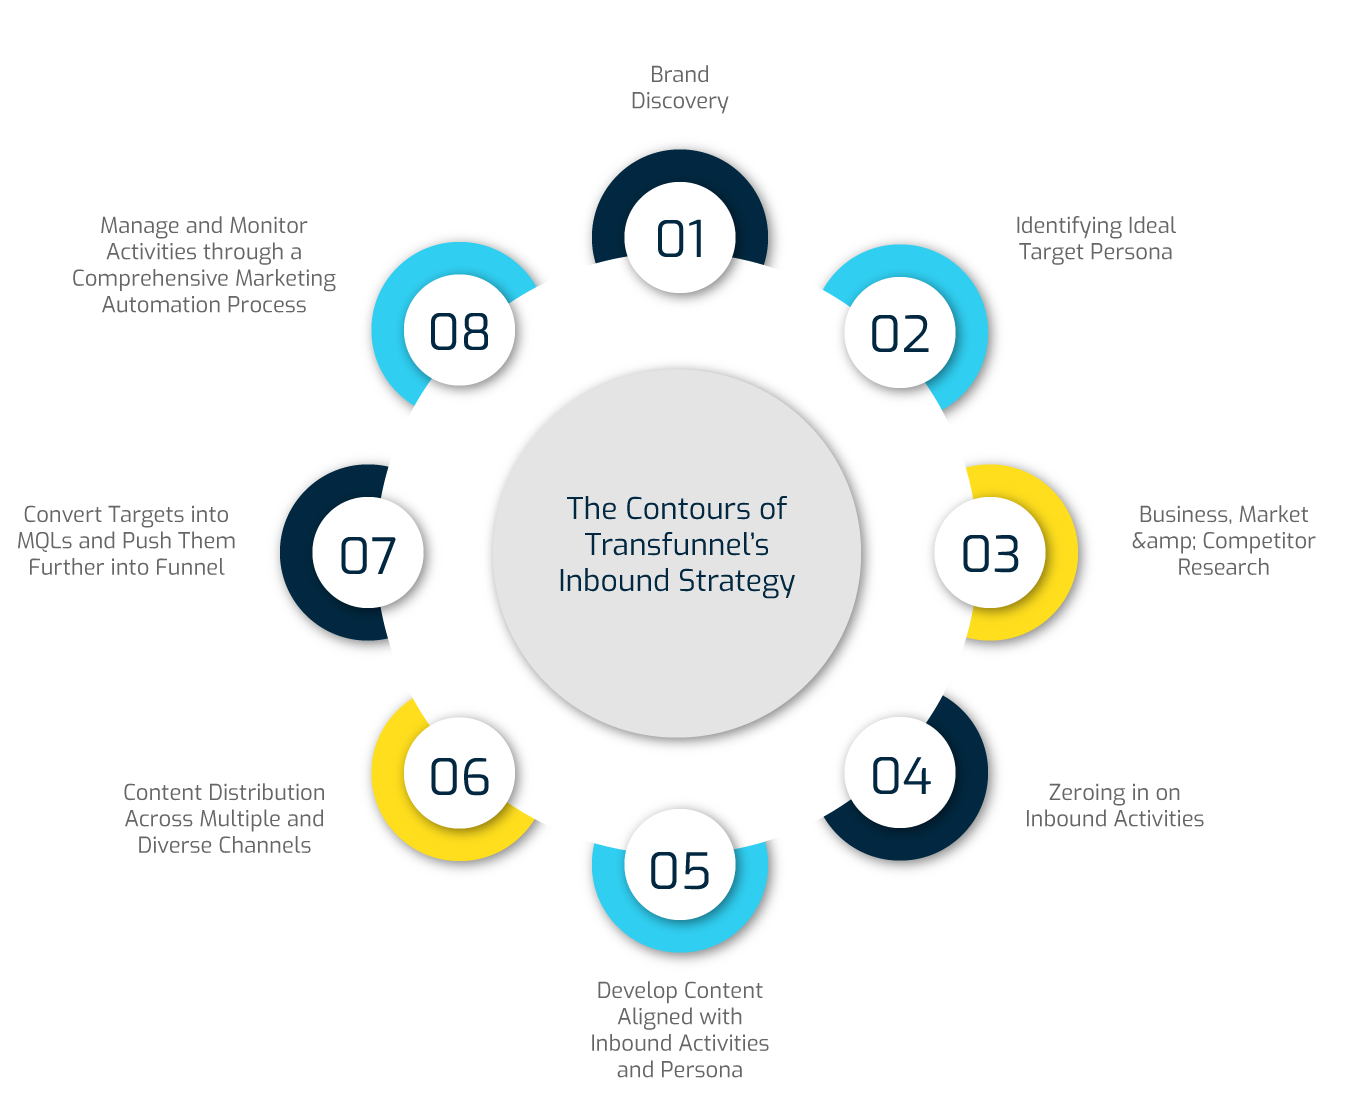 Contours of Transfunnel’s Inbound Strategy